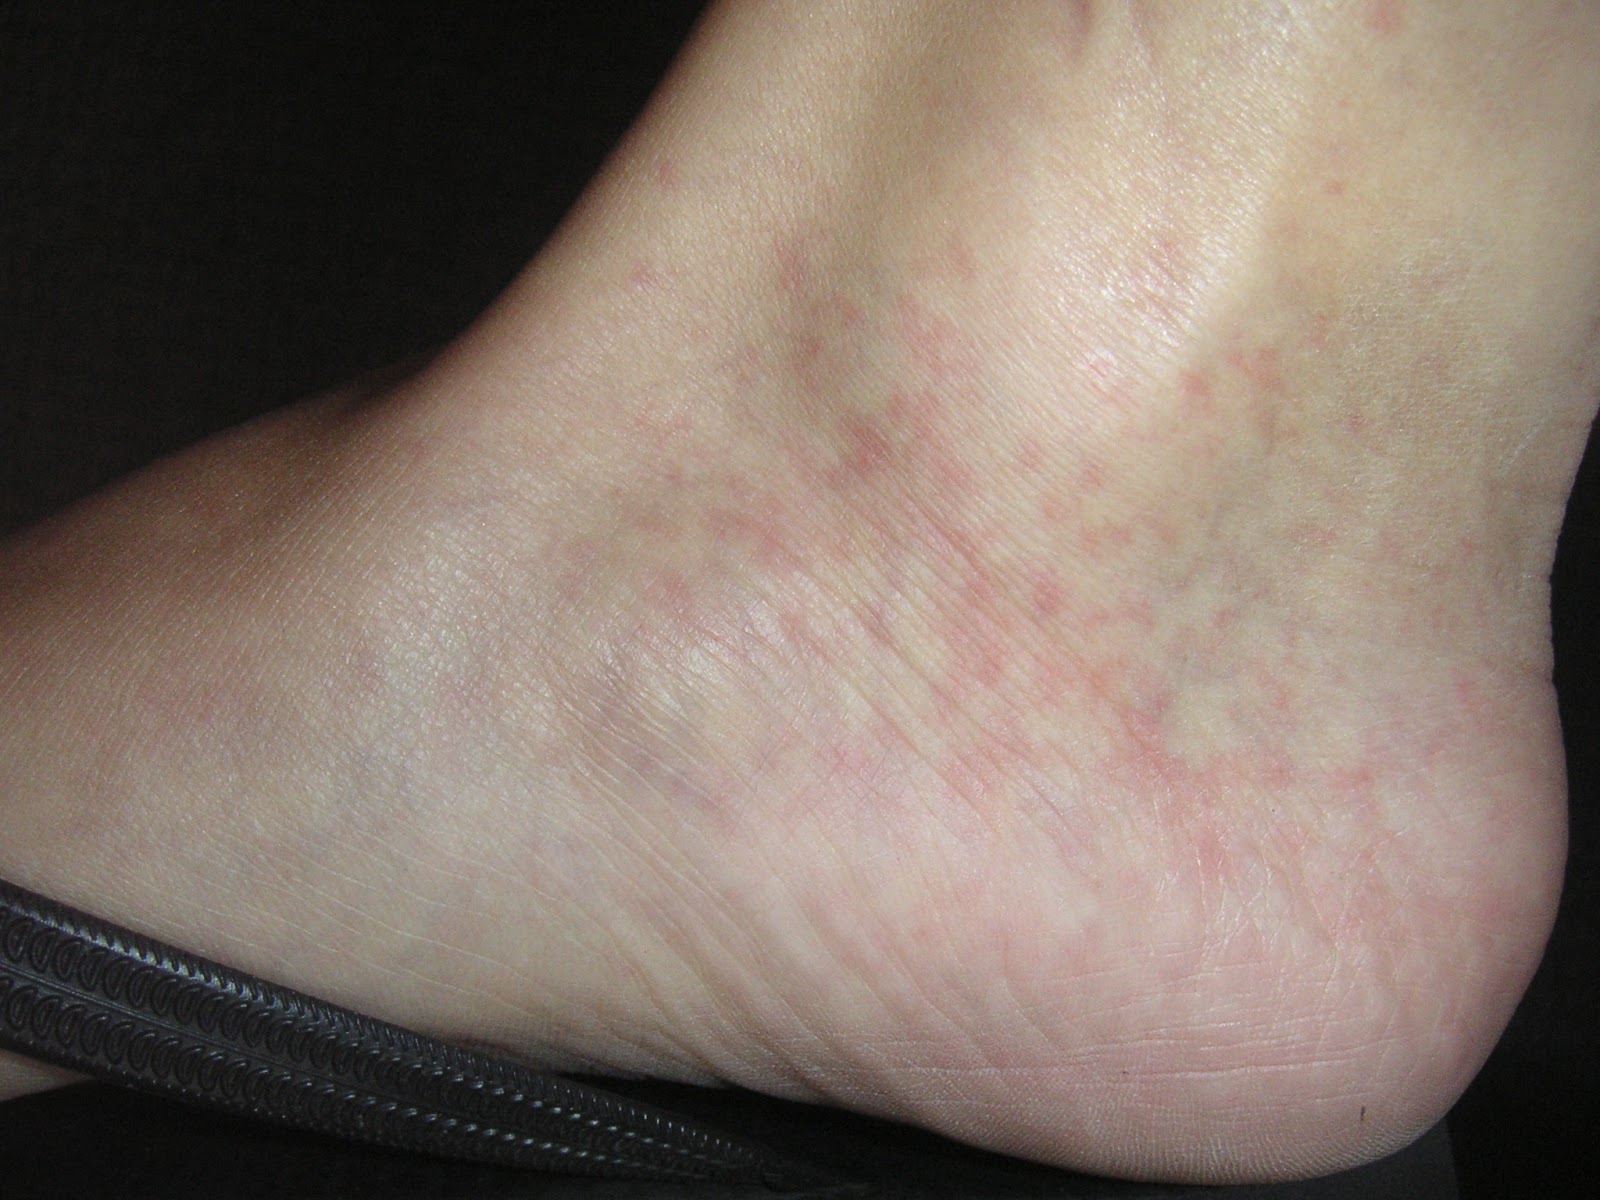 red spots on ankles